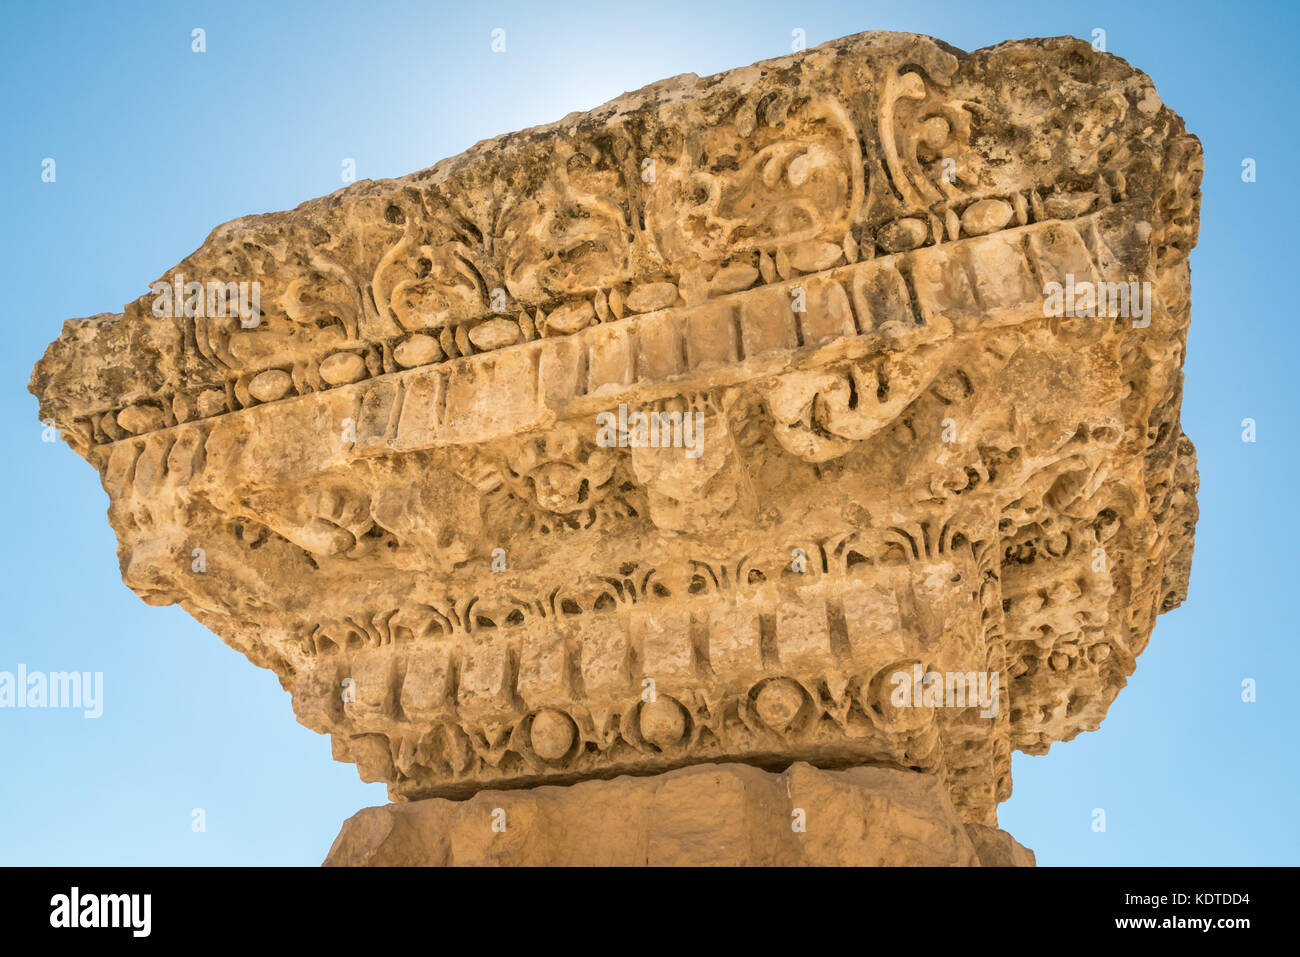 Close up detail of ruined stone carvings, Roman city of Jerash, ancient Gerasa, archeological site in northern Jordan, Middle East Stock Photo